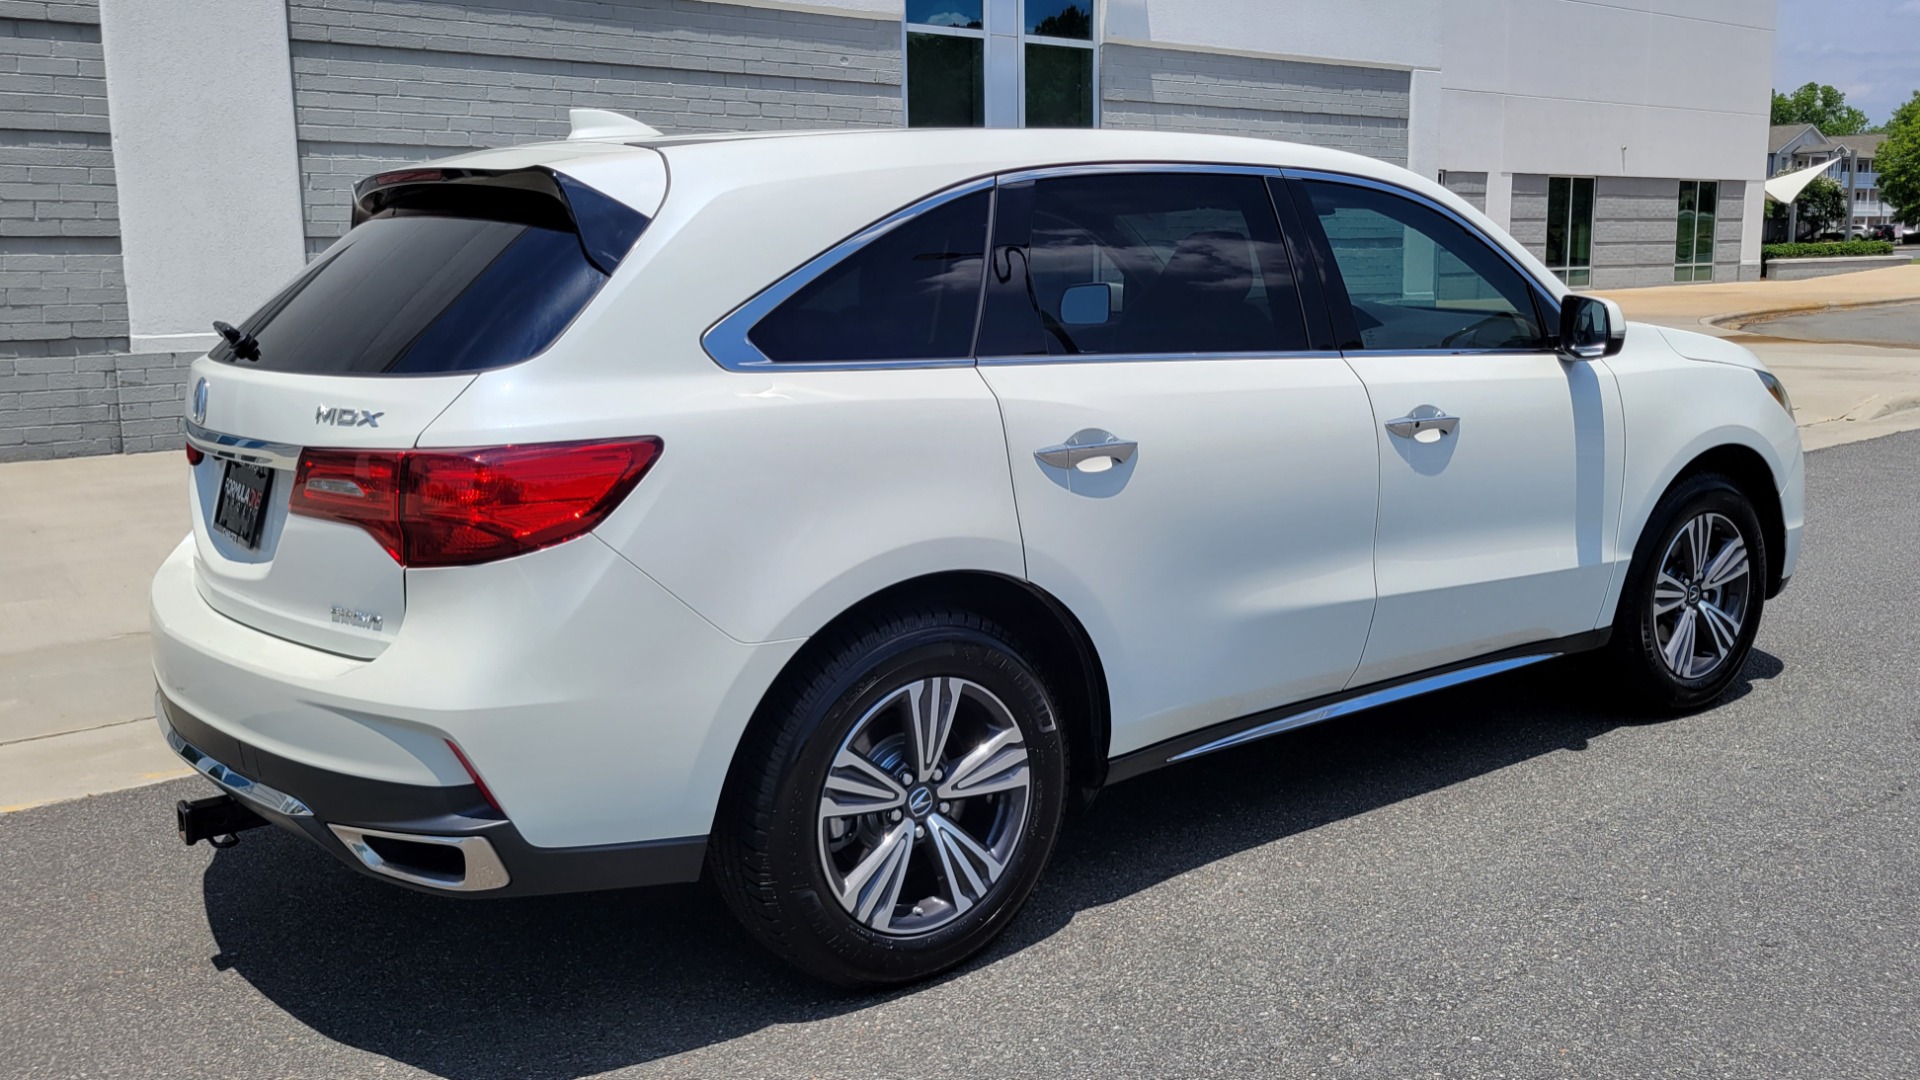 Used 2017 Acura MDX SH-AWD / 3.5L V6 / 9-SPD AUTO / SUNROOF / 3-ROW / CAMERA for sale $29,495 at Formula Imports in Charlotte NC 28227 8